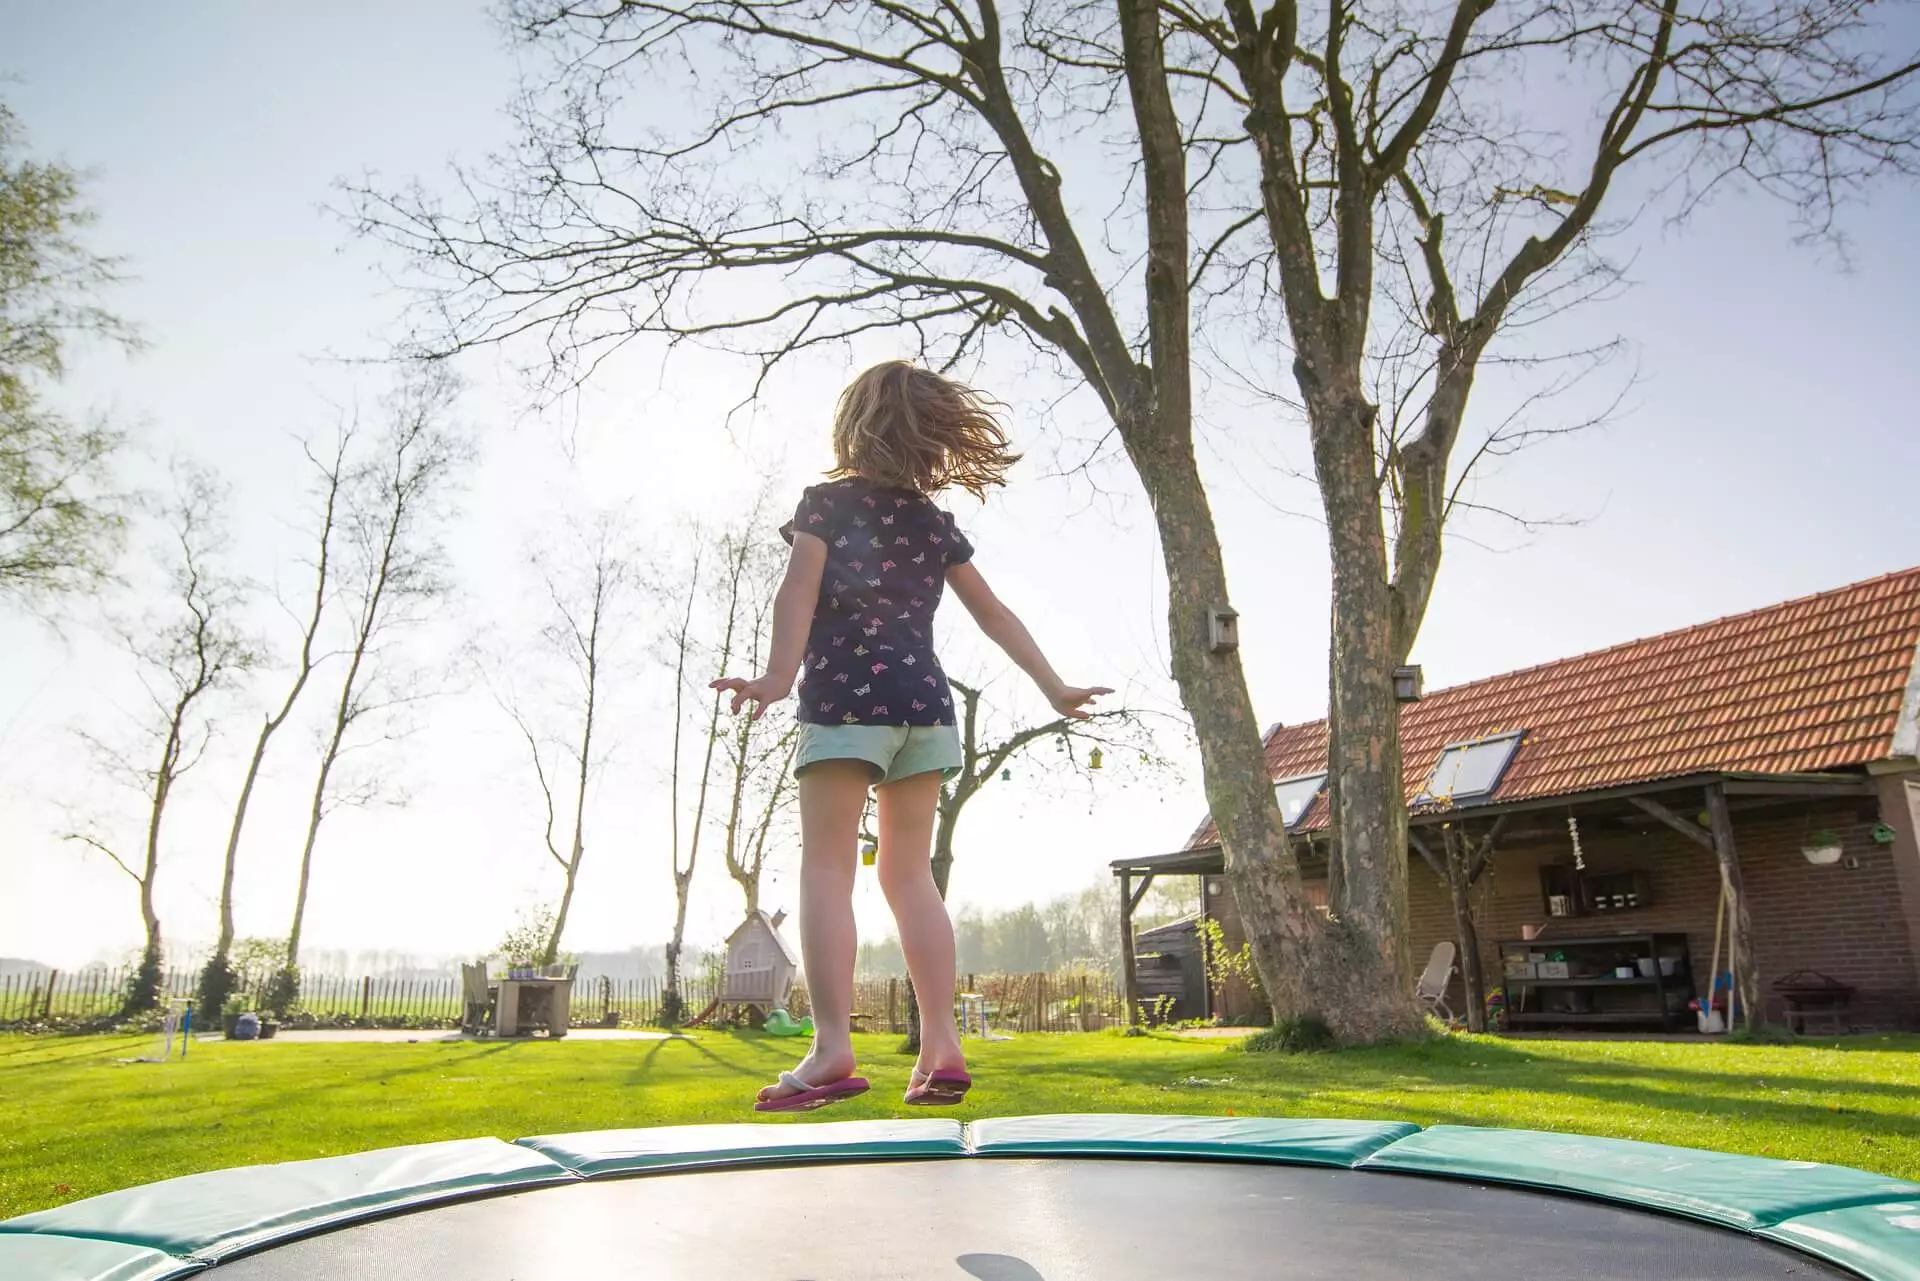 kromme Me Blaze Why trampolines may be more dangerous than you think